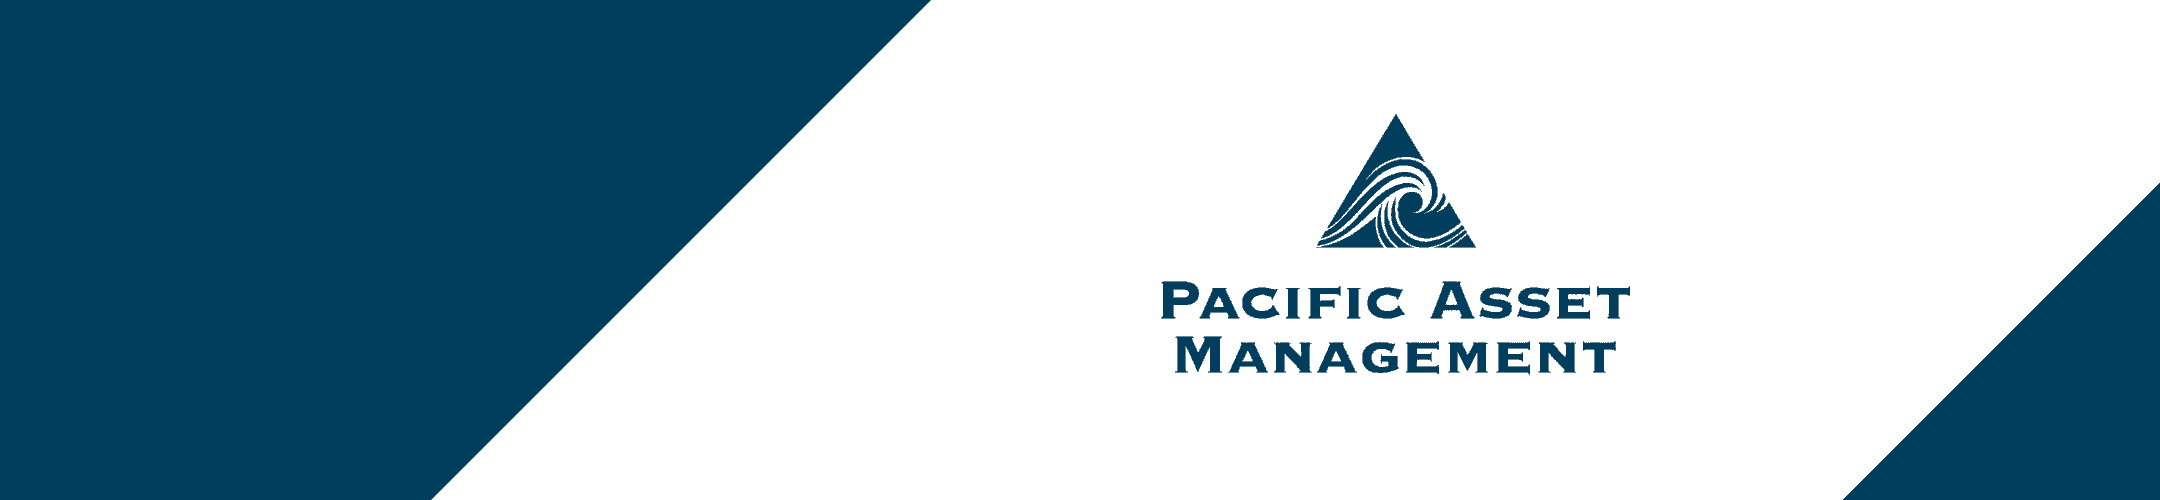 A sleek corporate design featuring the logo of pacific asset management on a blue and white background, symbolizing professional financial services.